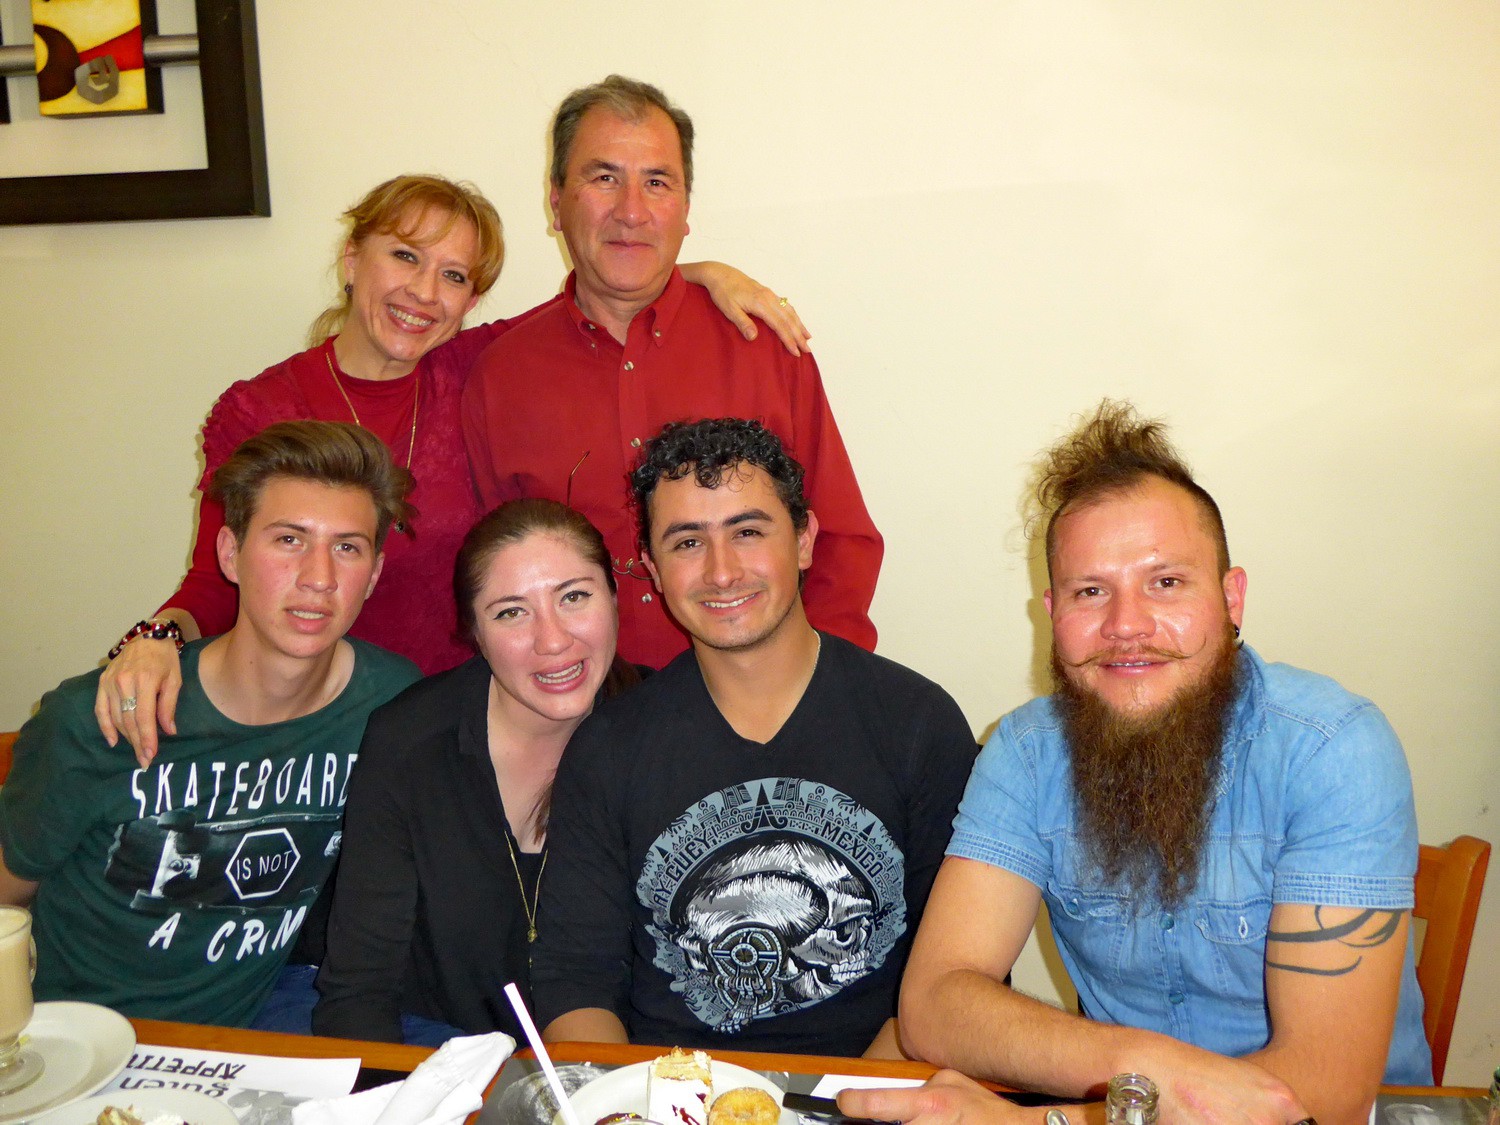 Our family in Mexico: Auntie Rushenka with her family plus boyfried of her daughter and Uncle Poldi 